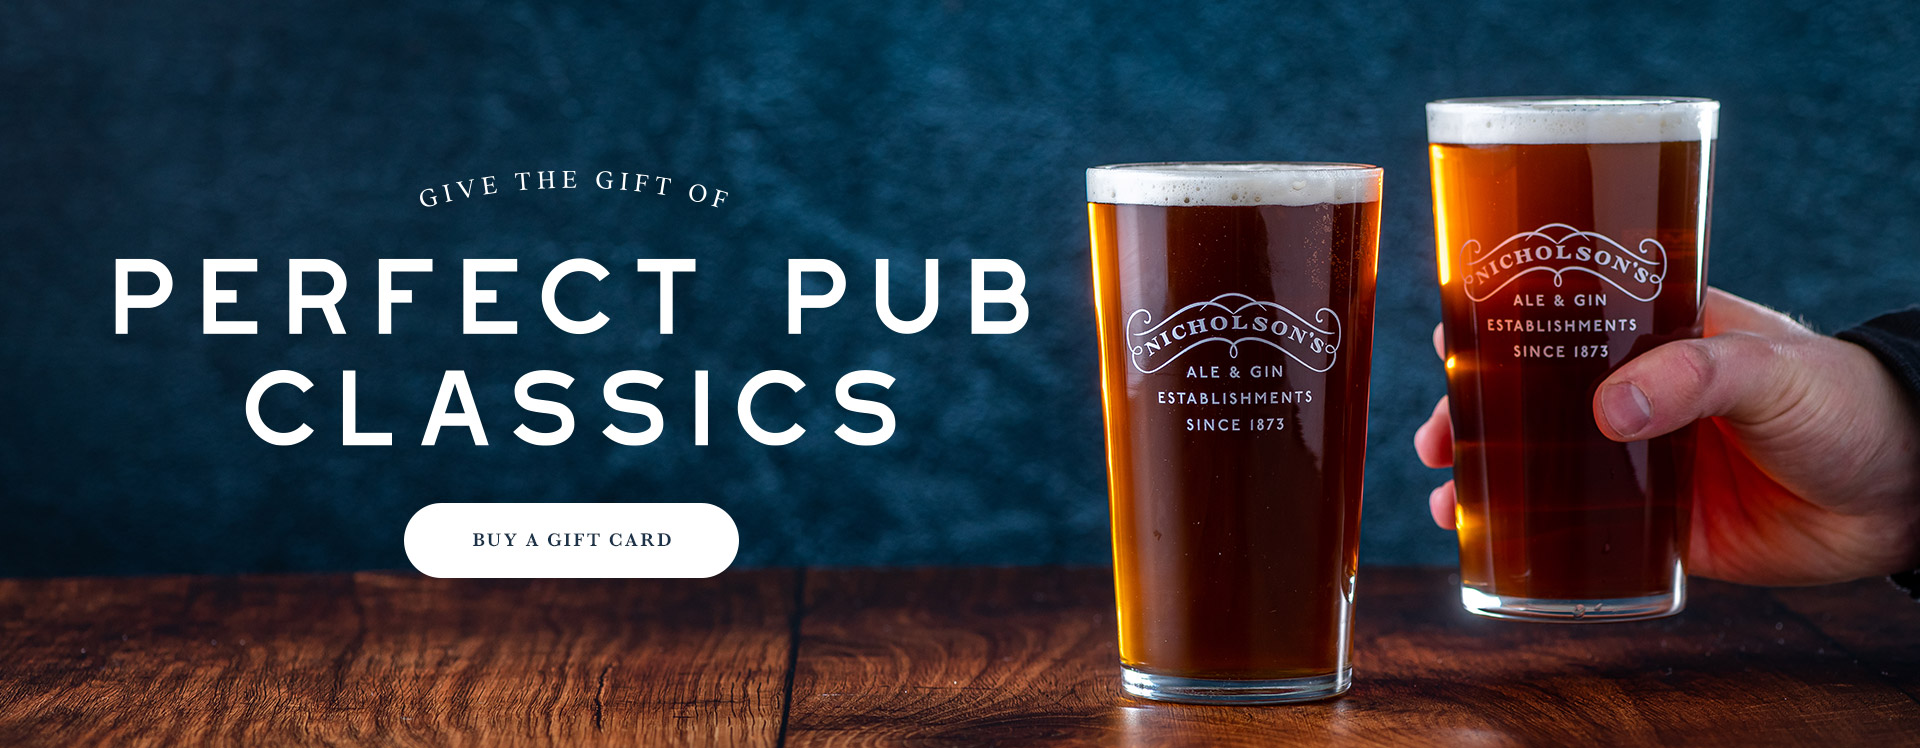 Nicholson’s Pub Gift Voucher at The Observatory in North Greenwich